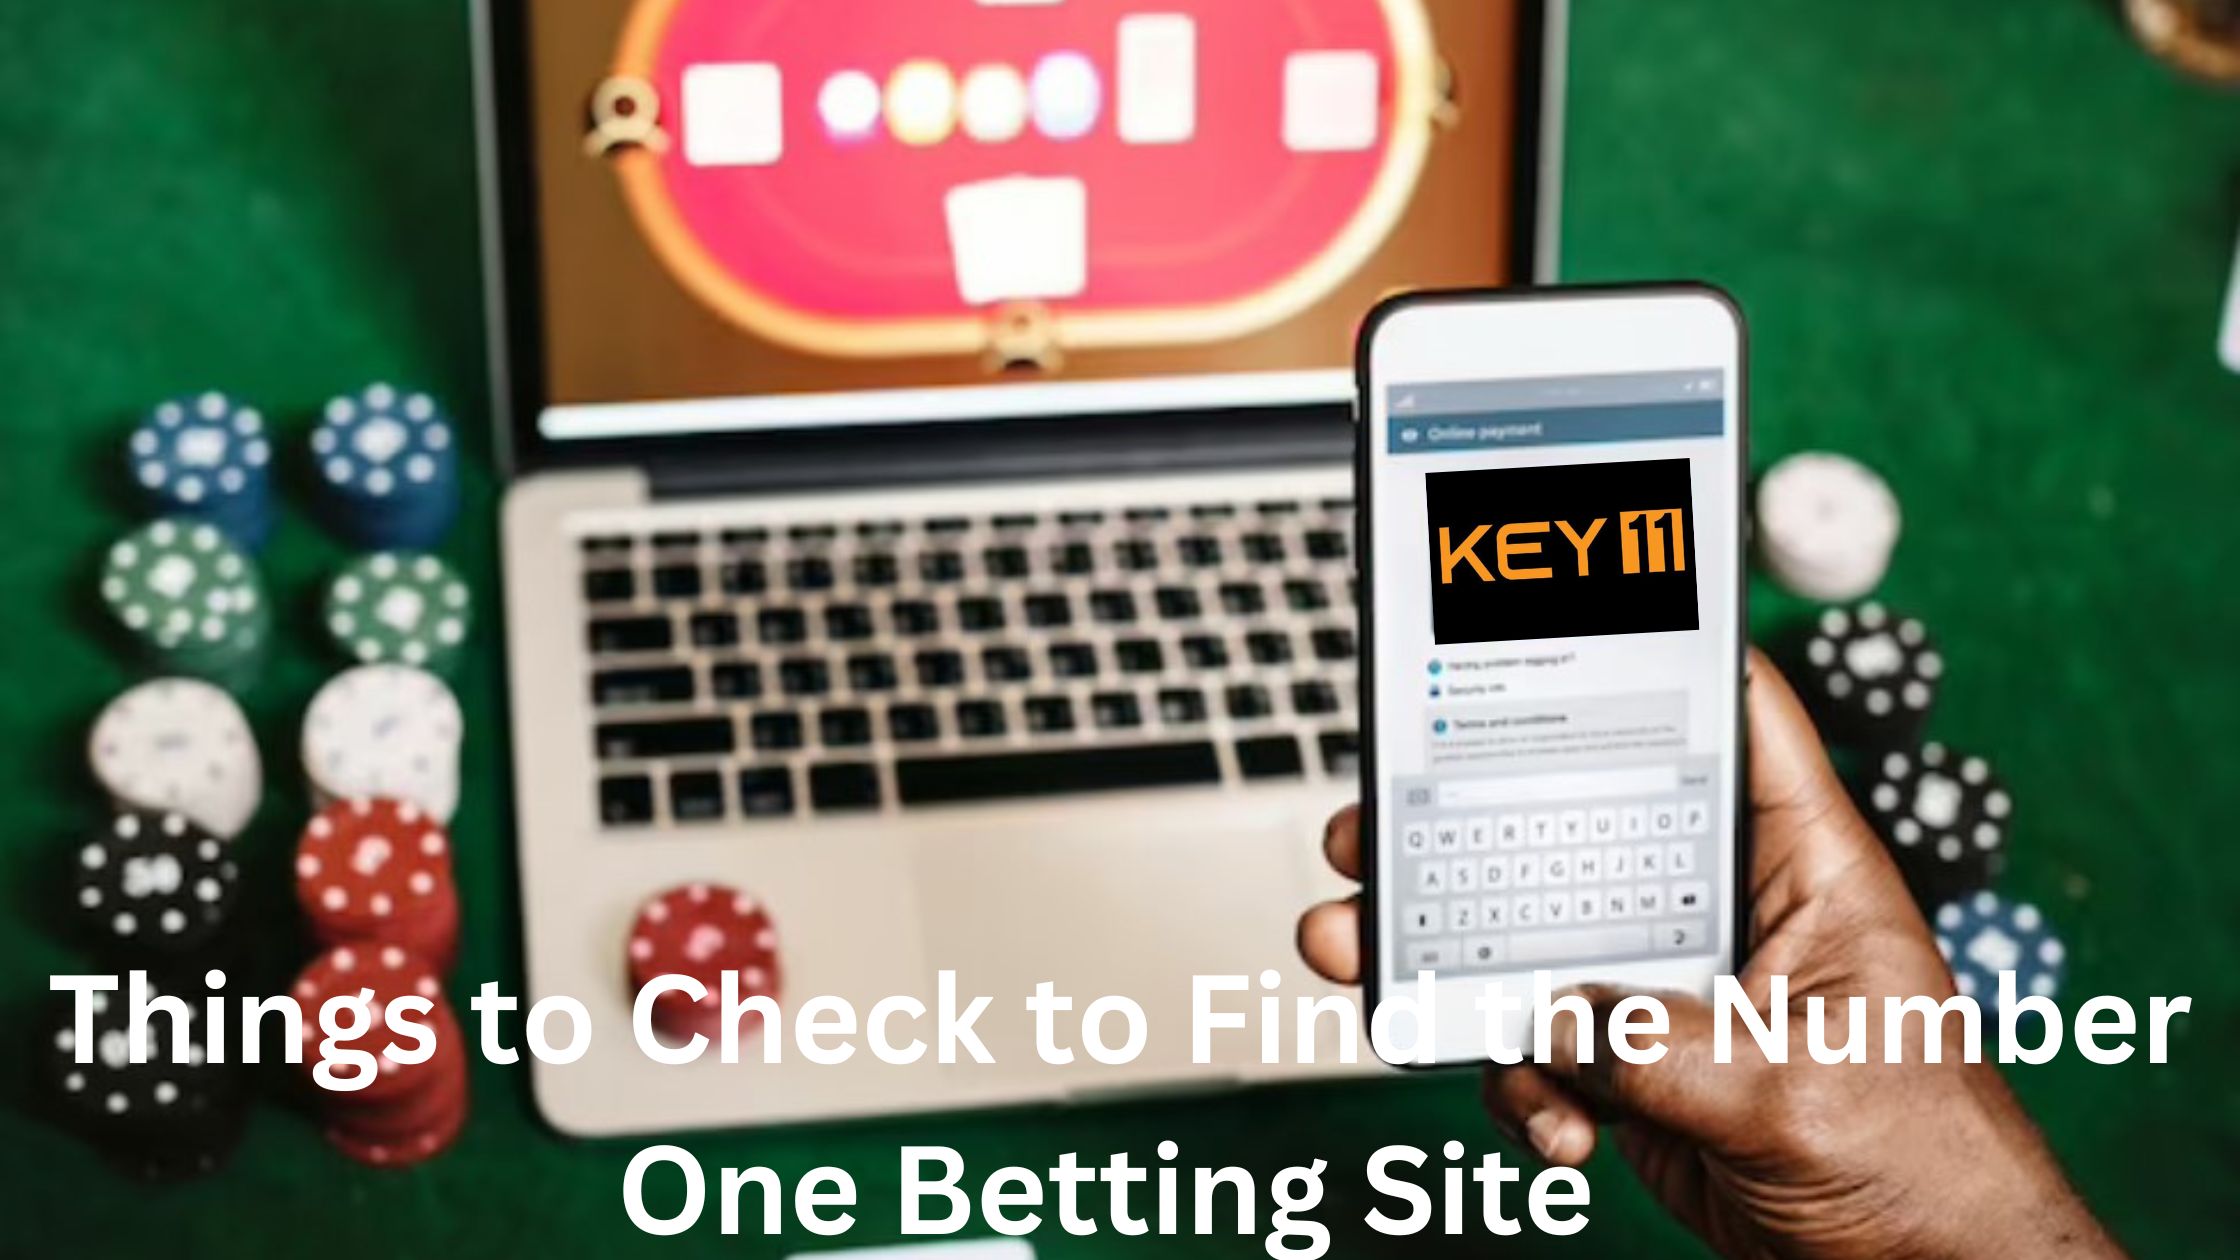 Number One Betting Site